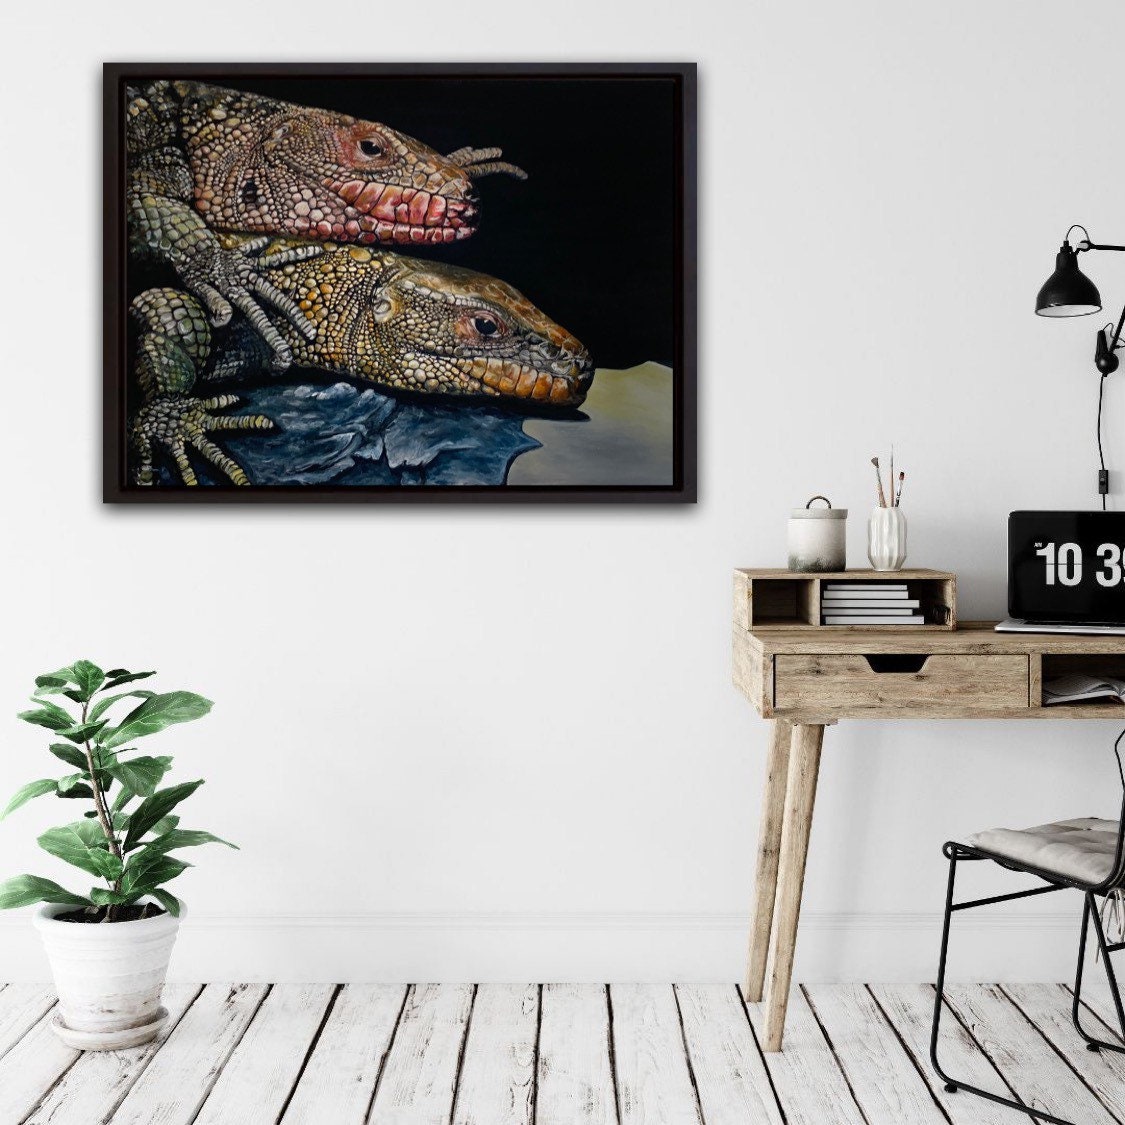 Caiman Lizards atop each other Reptile Oil Painting Large | Etsy